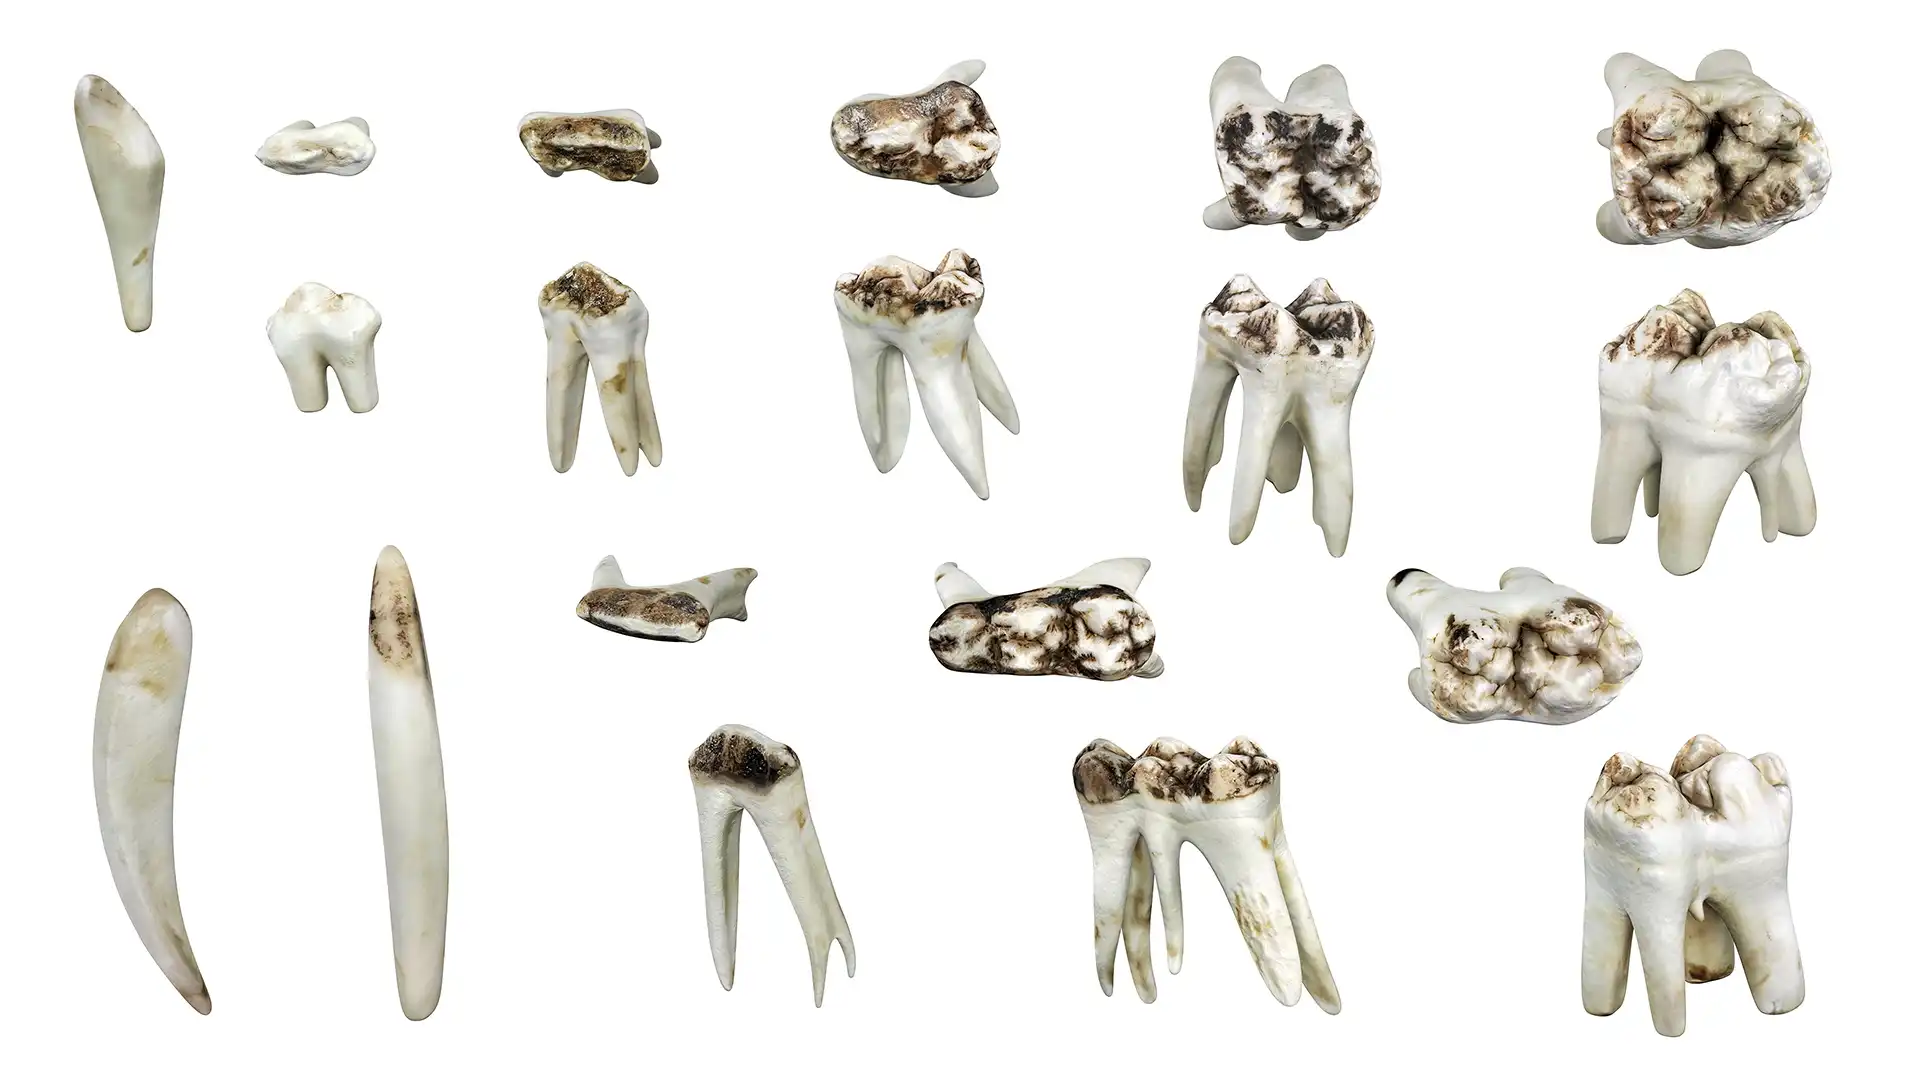 Eleven separate high-quality low-polygonal 3D models of teeth made from scanned domestic pig teeth, shown from the side and top. Six upper and five lower incisors, molars and premolars.